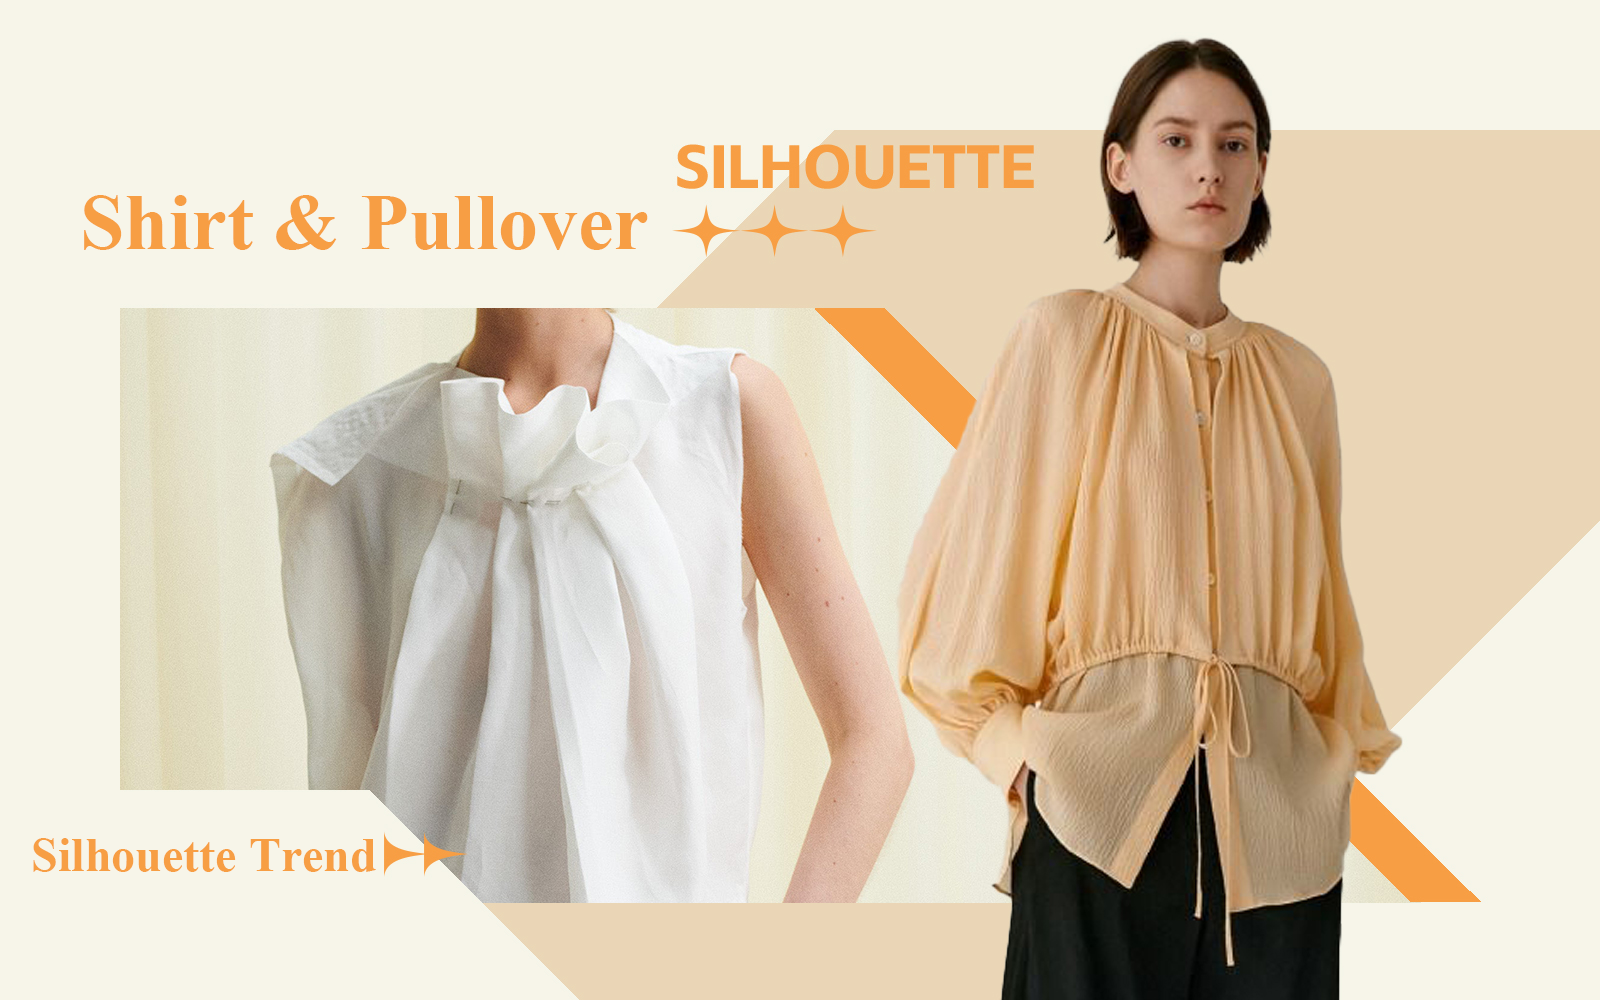 French Style -- The Silhouette Trend for Women's Shirt & Pullover